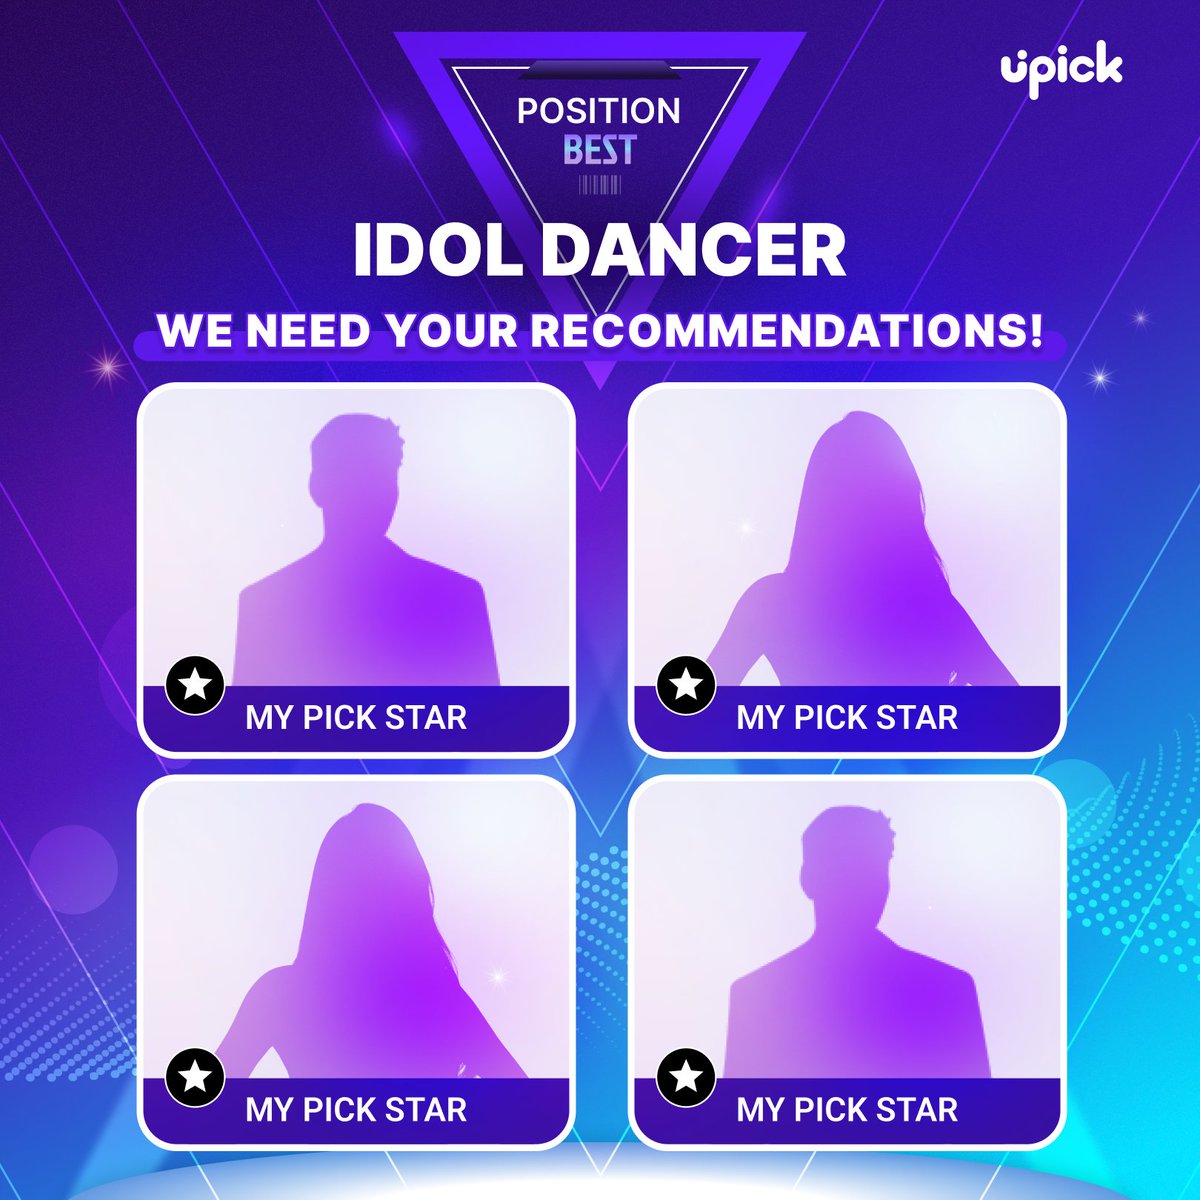 👑 The next UPICK Position vote is > #DANCER < 🕺💃

내 아이돌이 후보로 선정될 수 있는 기회 (✧◡✧๑)
A chance for my idol to be selected as a nominations❗️❕

단, 추천 받은 아이돌이 후보에 포함되지 않을 수 있습니다
The recommended idol may not be included in the nominations